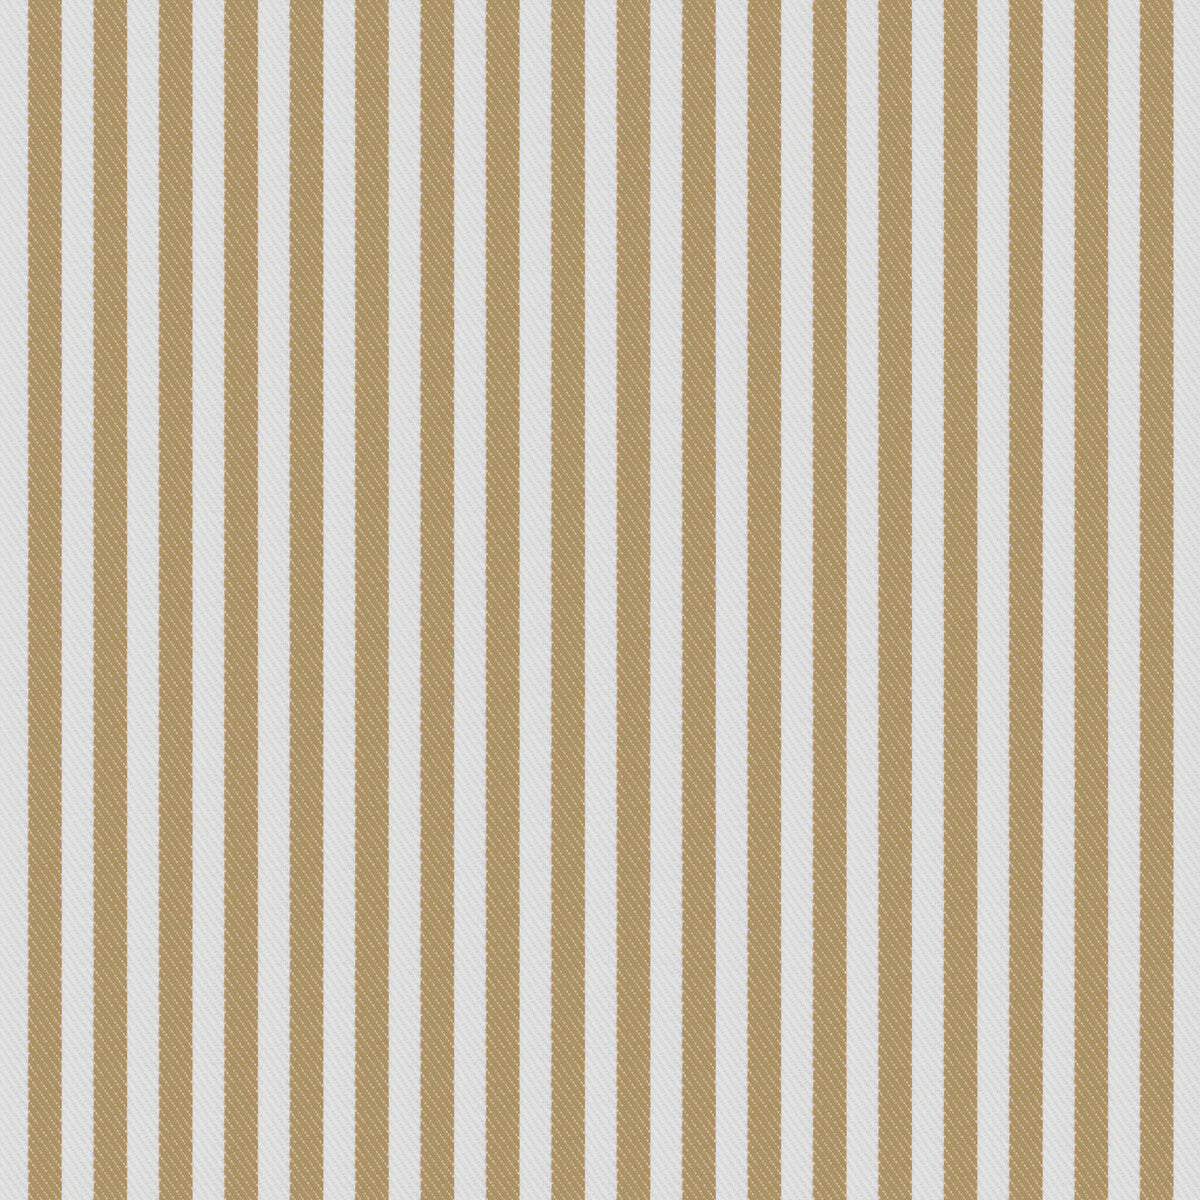 Calobra fabric in beige color - pattern GDT5684.009.0 - by Gaston y Daniela in the Gaston Maiorica collection